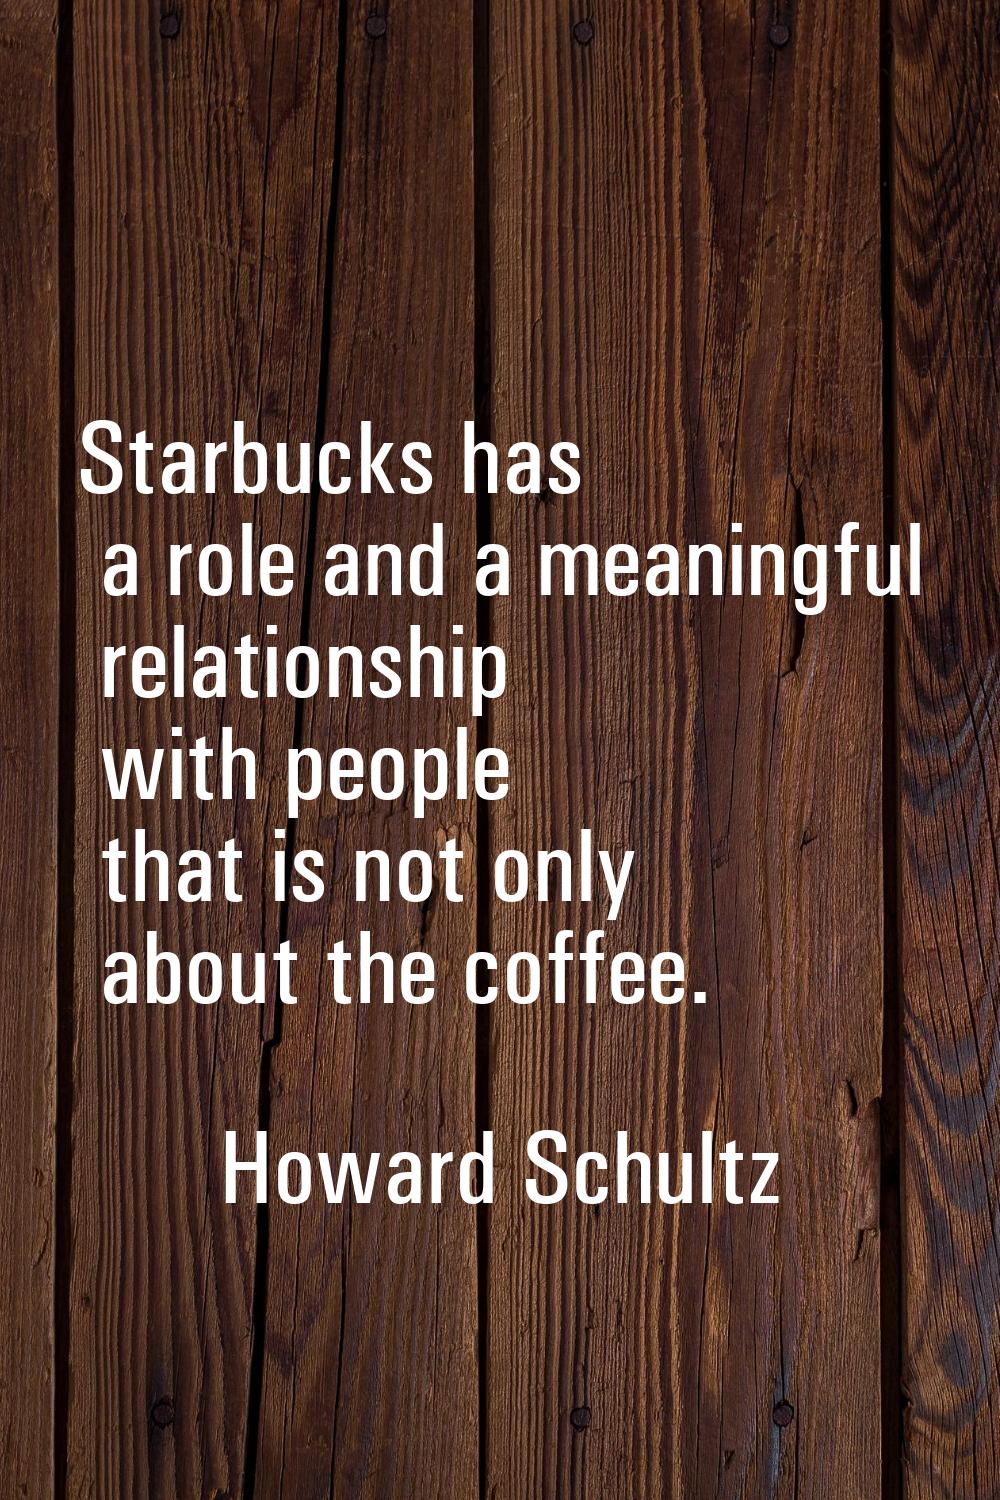 Starbucks has a role and a meaningful relationship with people that is not only about the coffee.